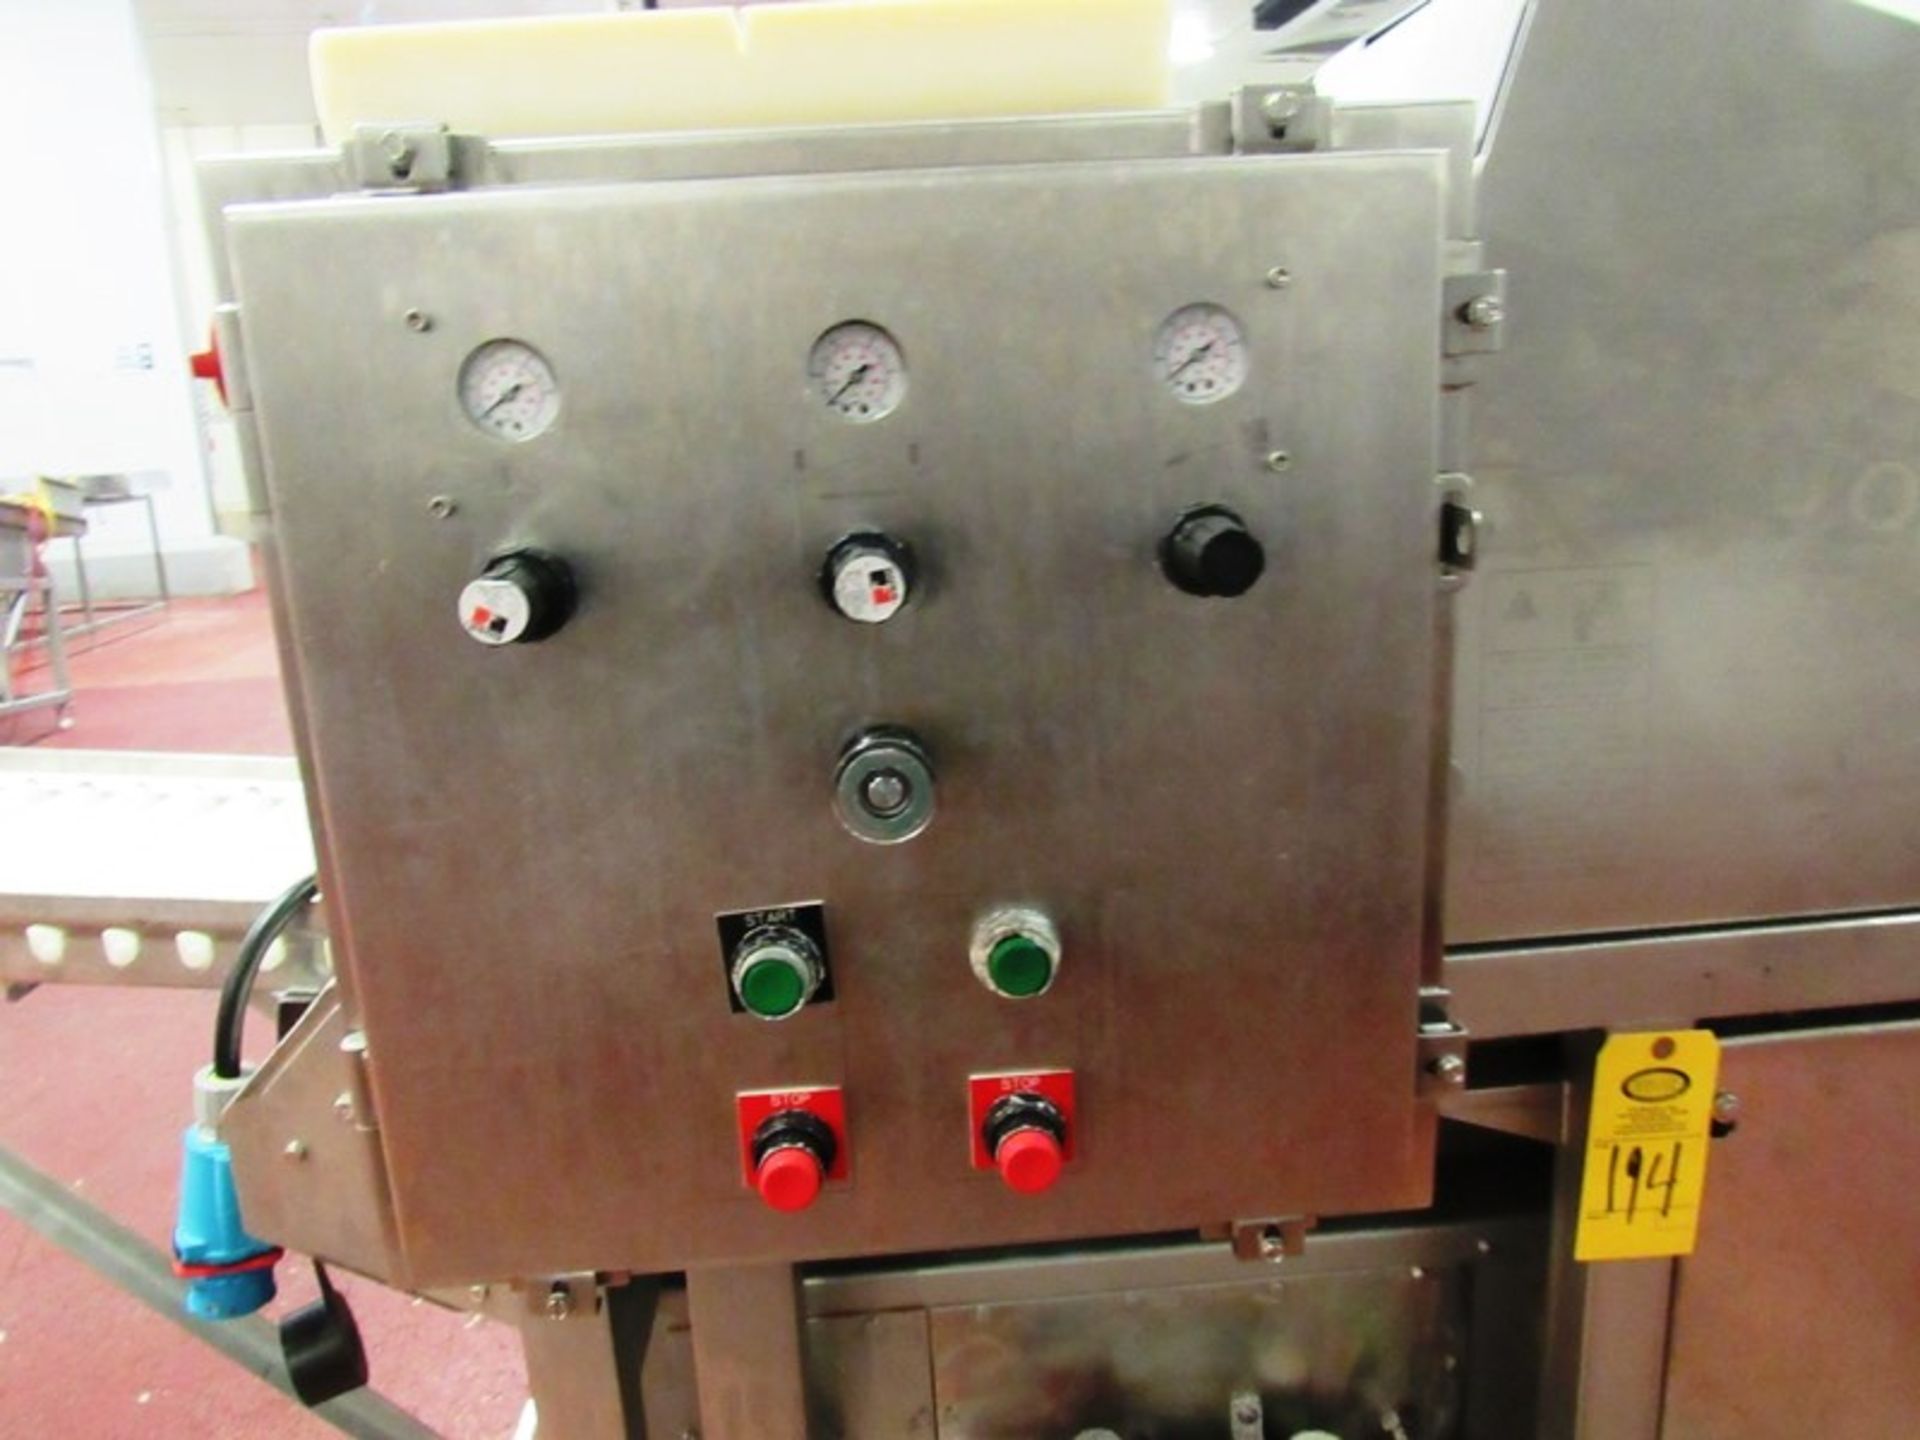 Townsend Mdl. 1450 Injector, Ser. #498, 480 volts, Mfg. 2001, with brine tank, roto filter, 14 1/ - Image 3 of 8